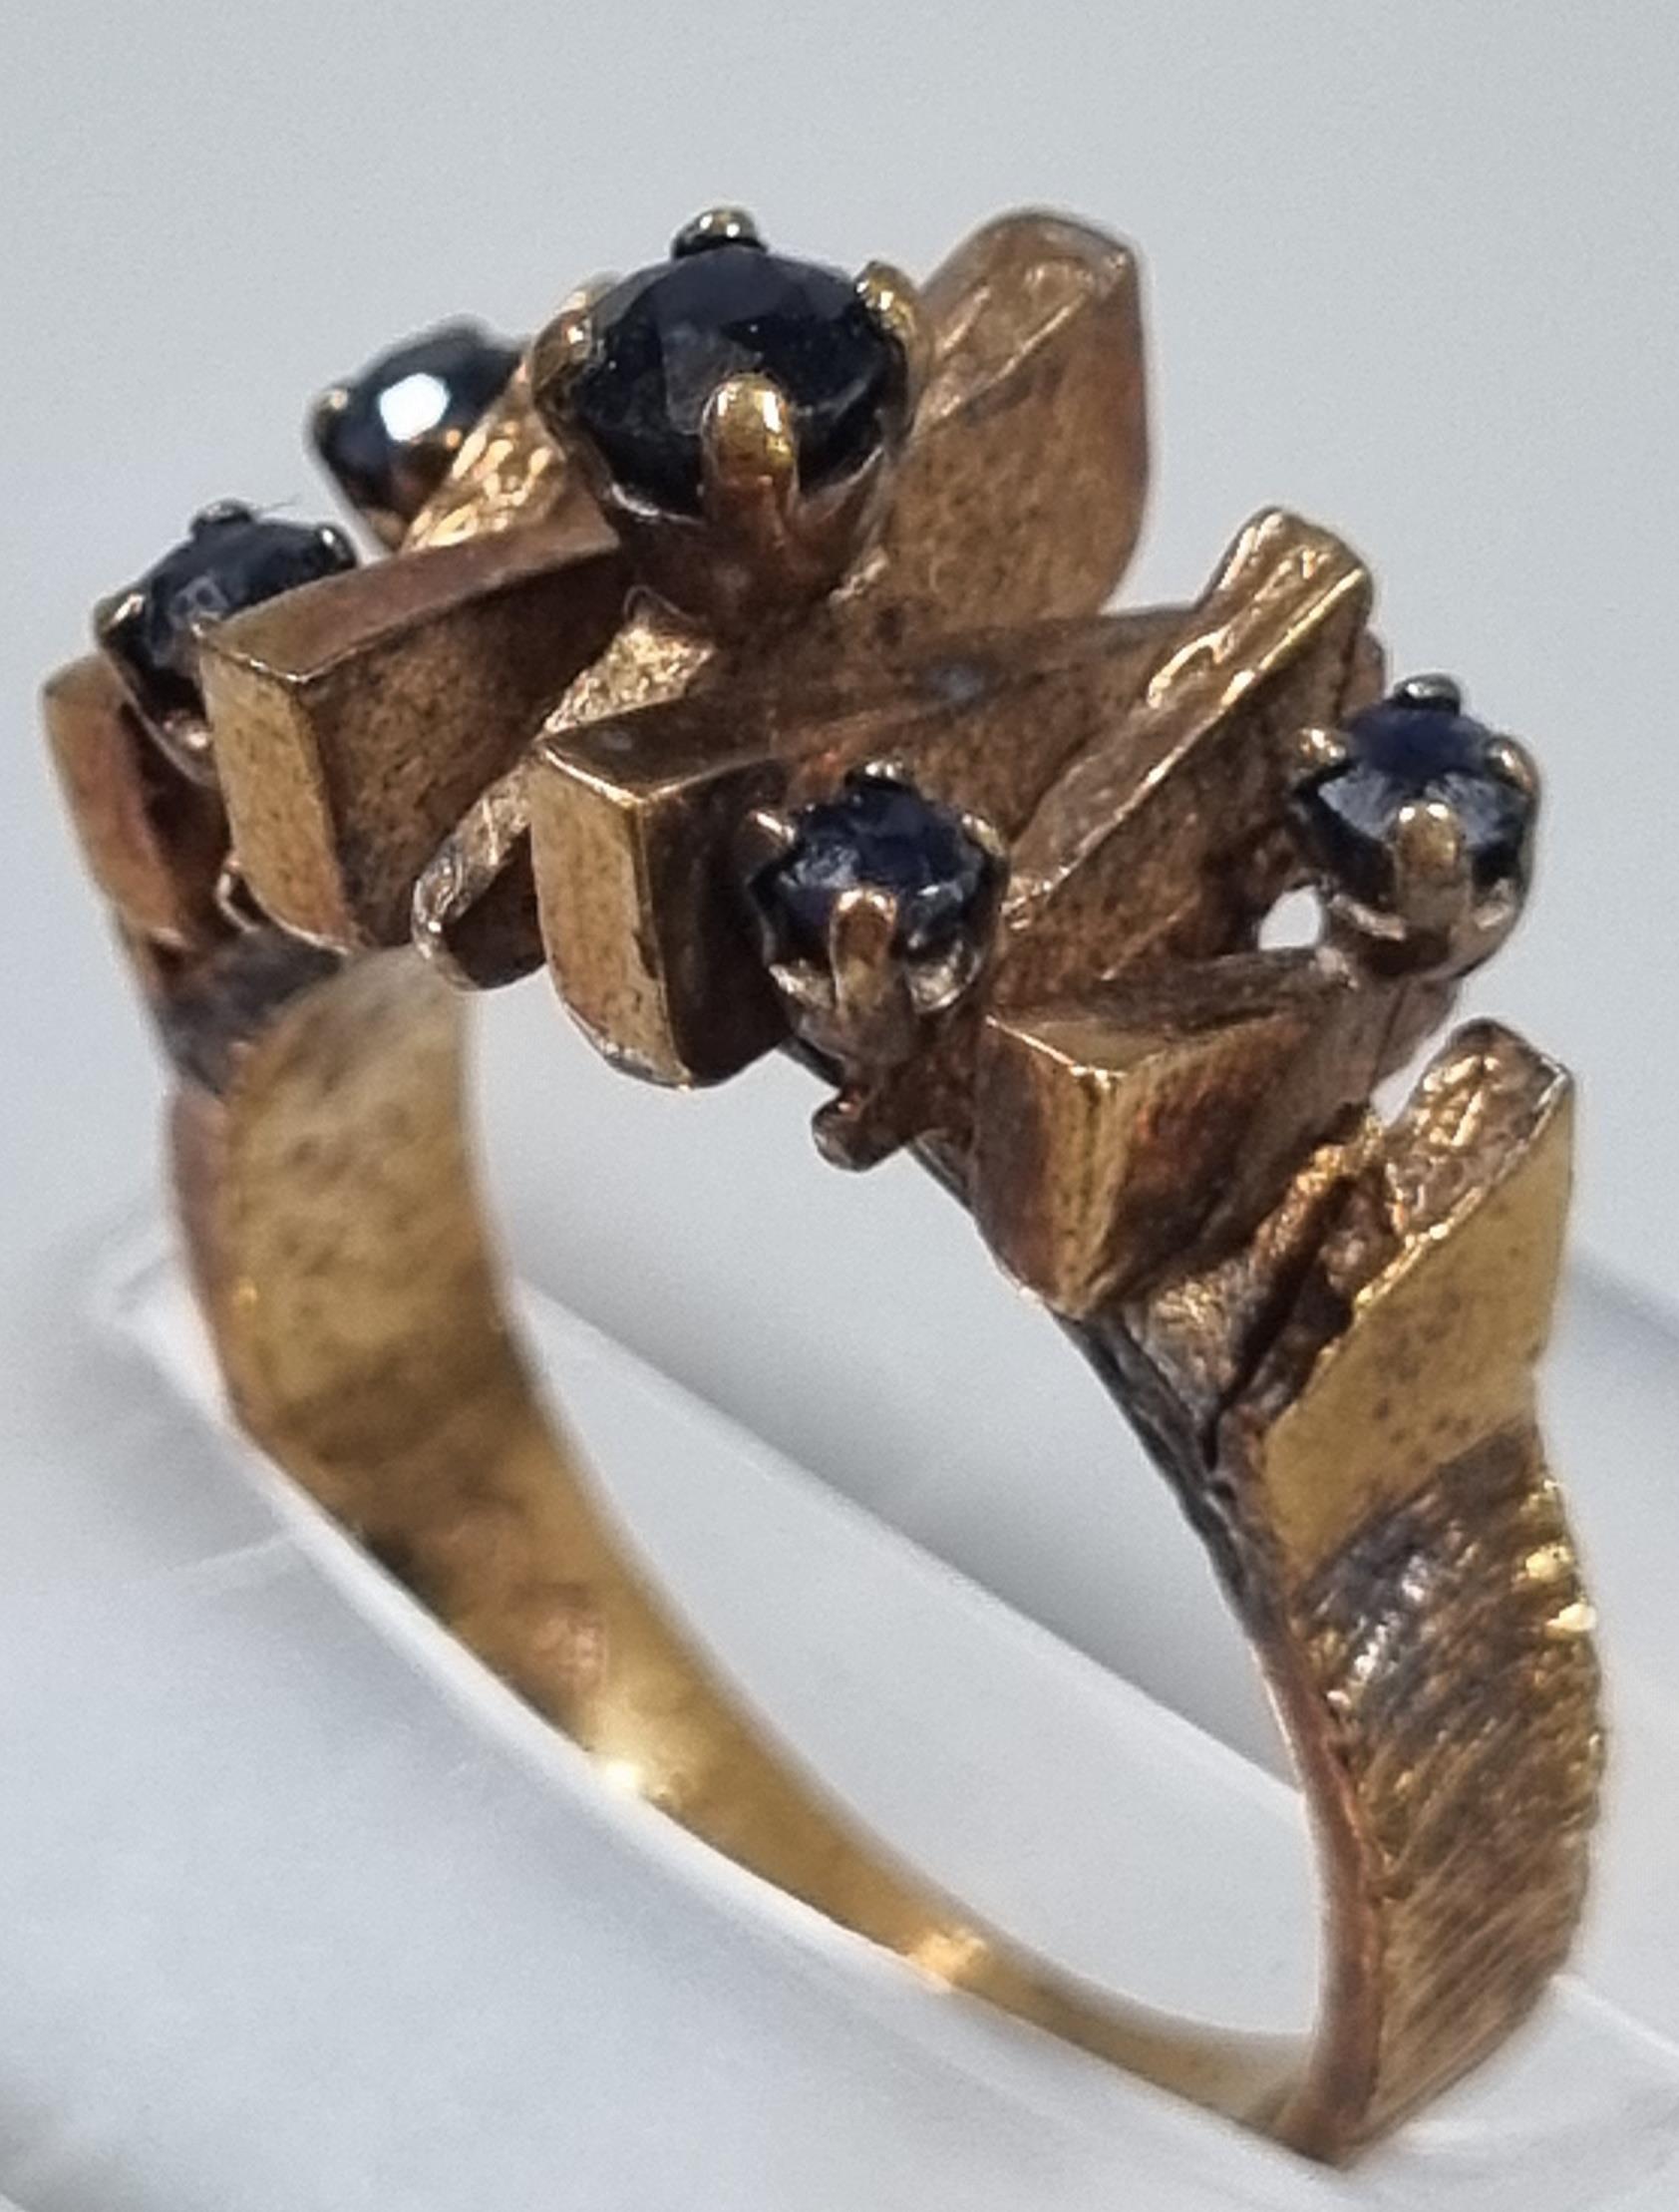 9ct gold modernist design and blue stone dress ring. 5g approx. Size K1/2. (B.P. 21% + VAT) - Image 2 of 4